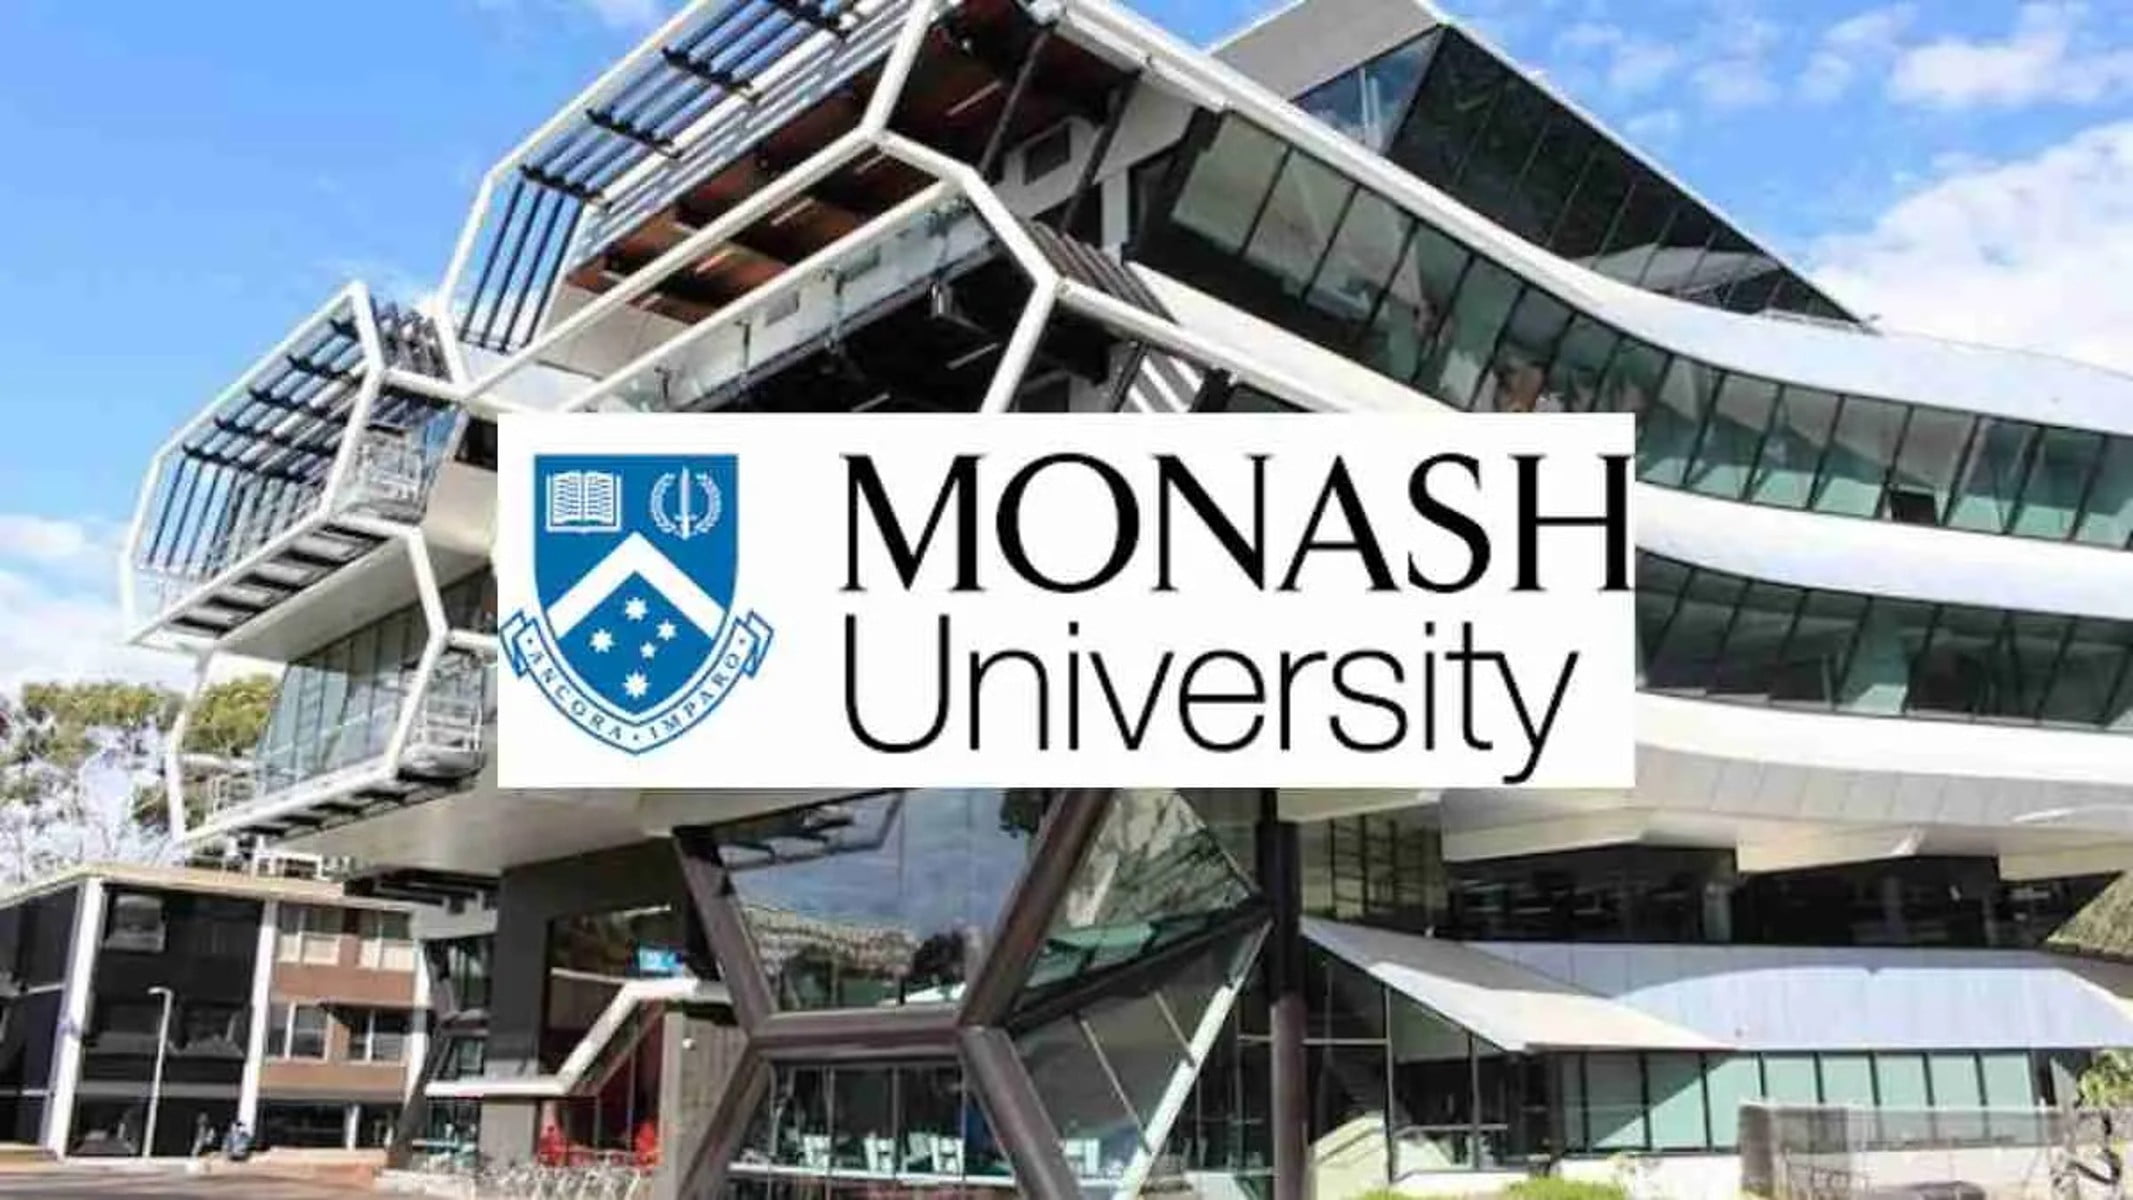 Achieving Potential Support Scholarships 2024 at Monash University